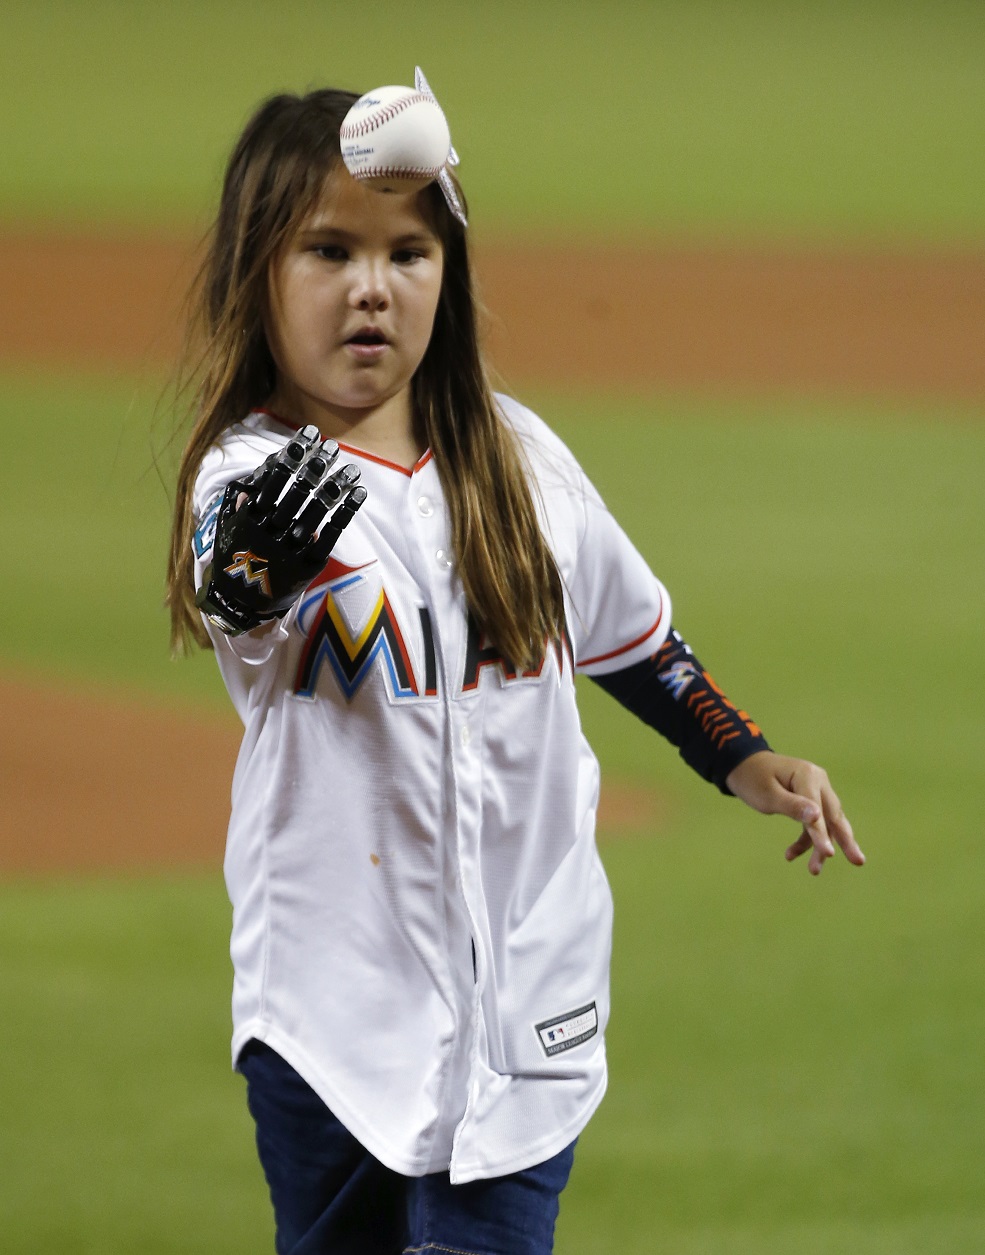 Eight-year-old Hailey Dawson completes “Journey to 30,” throwing pitch at ever MLB park with 3D-printed hand